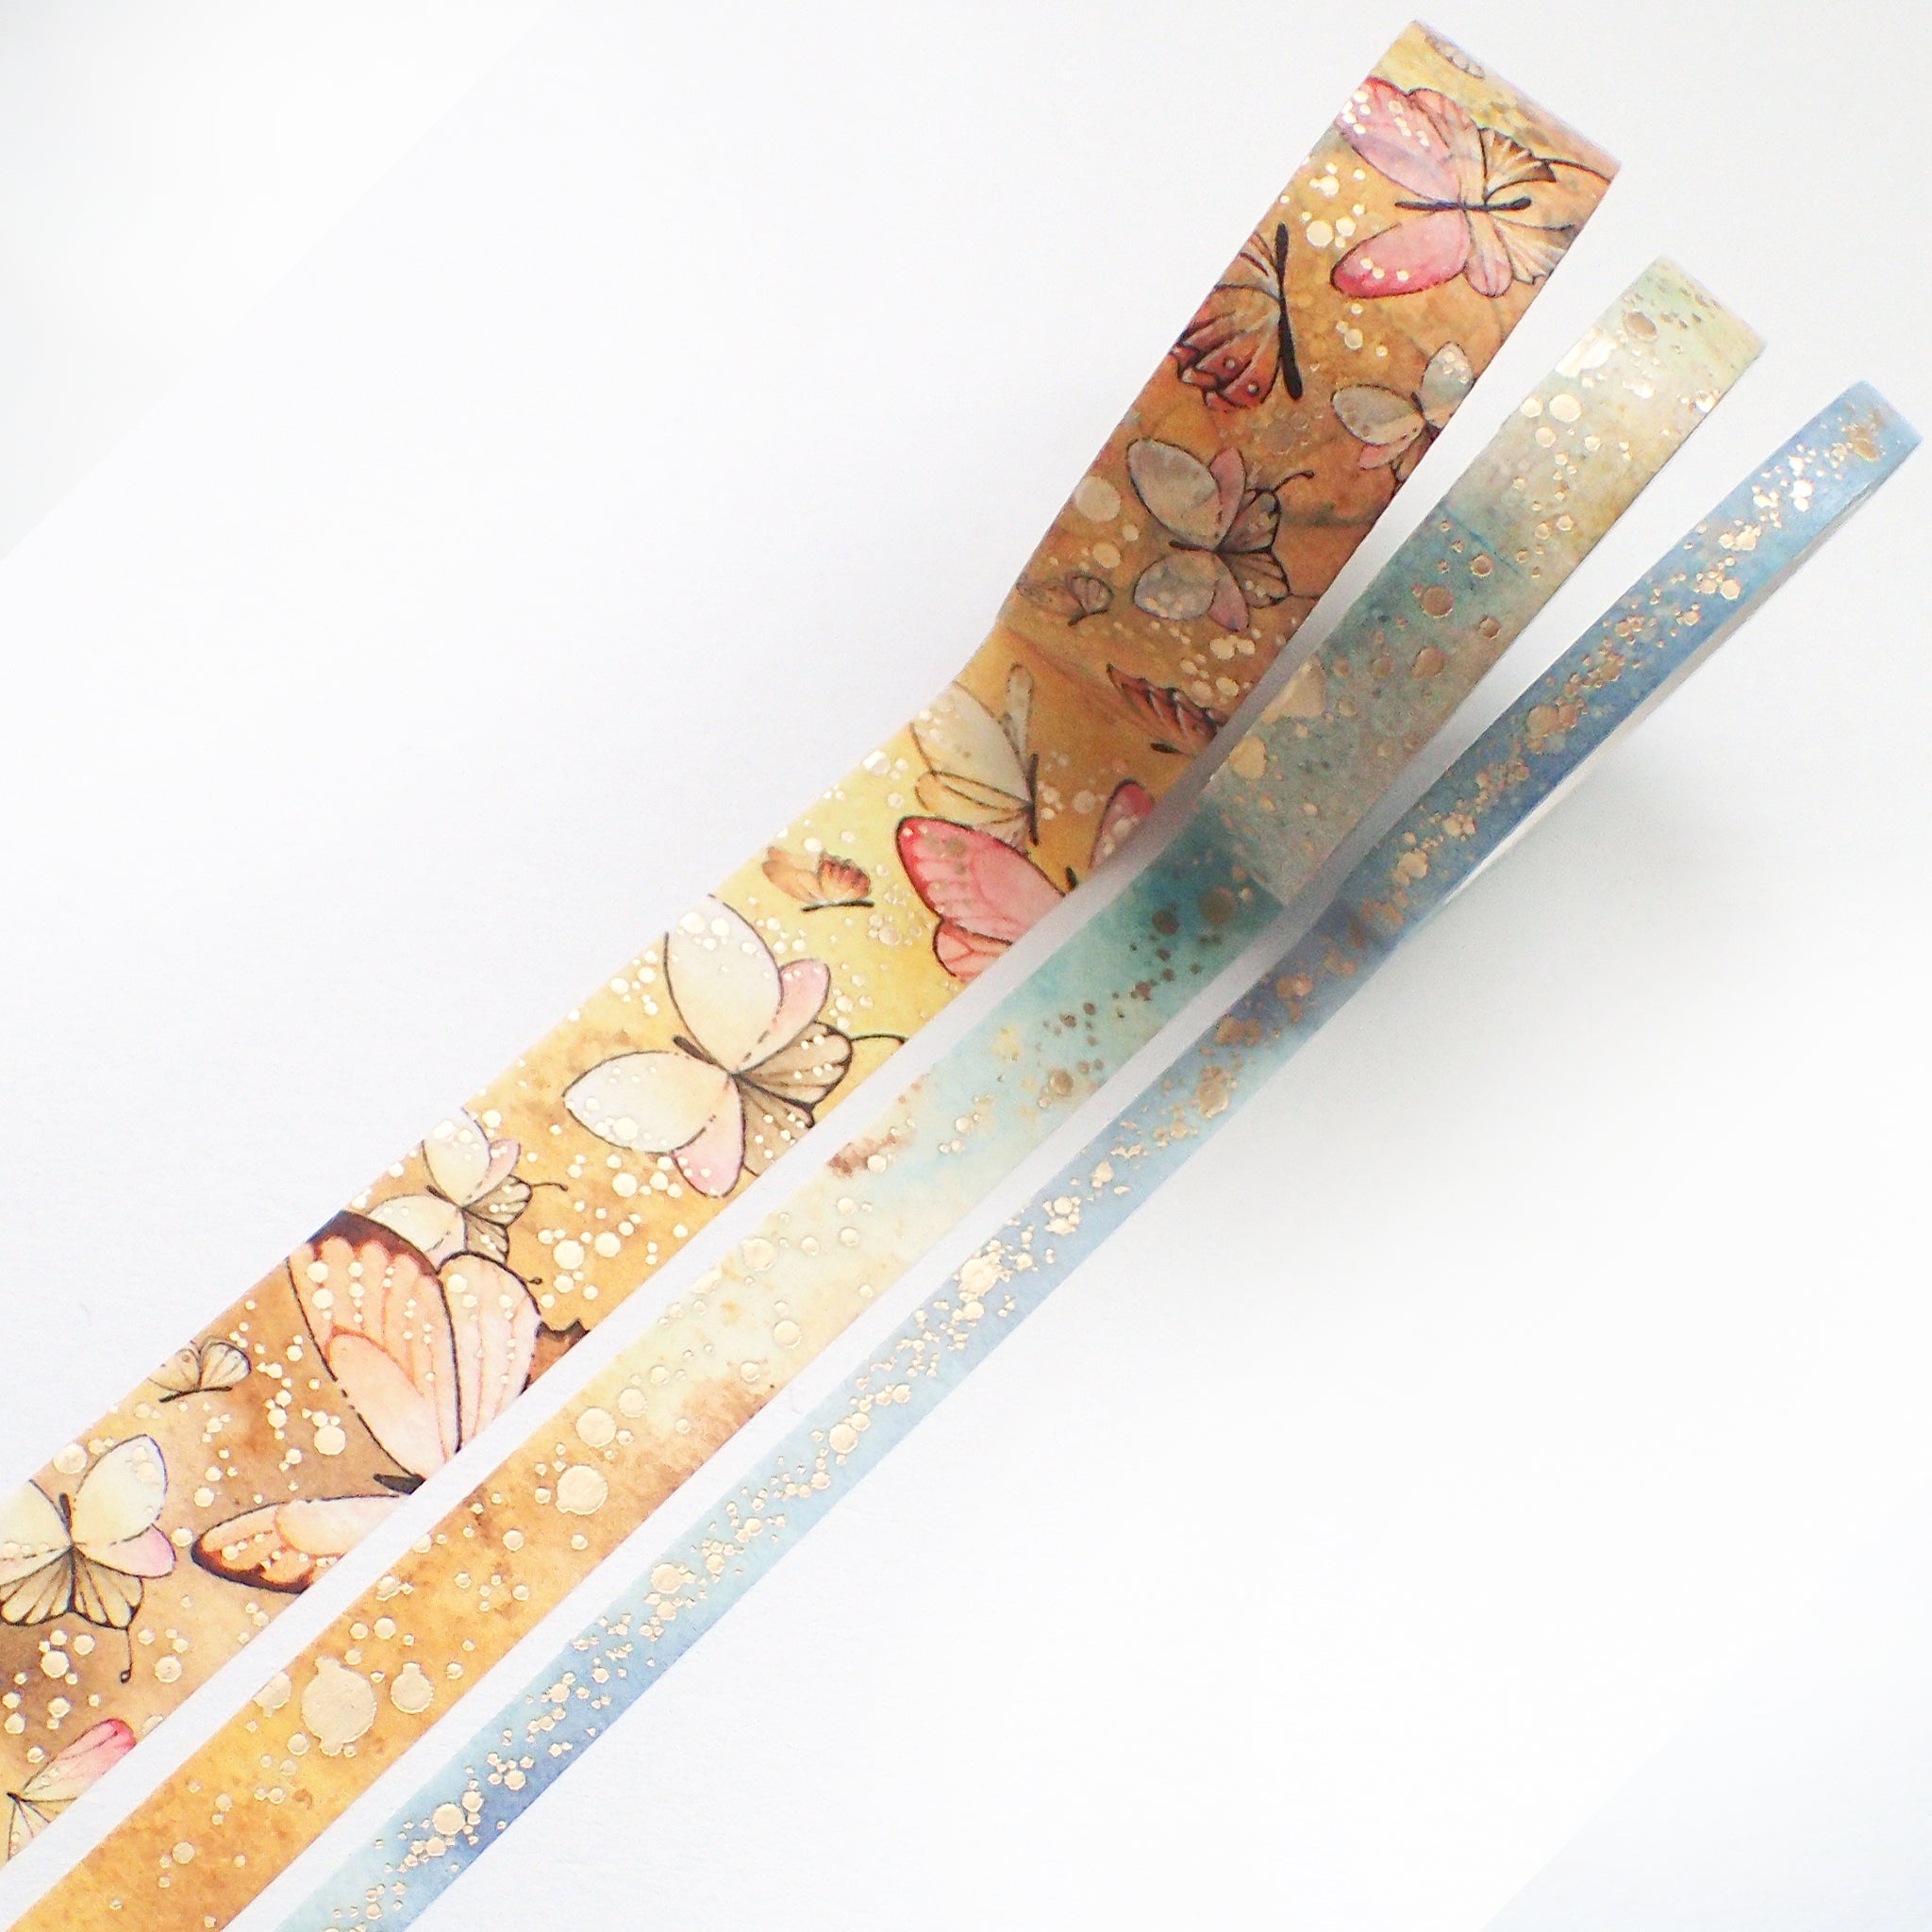 3 different watercolored washi tapes for summer or fall